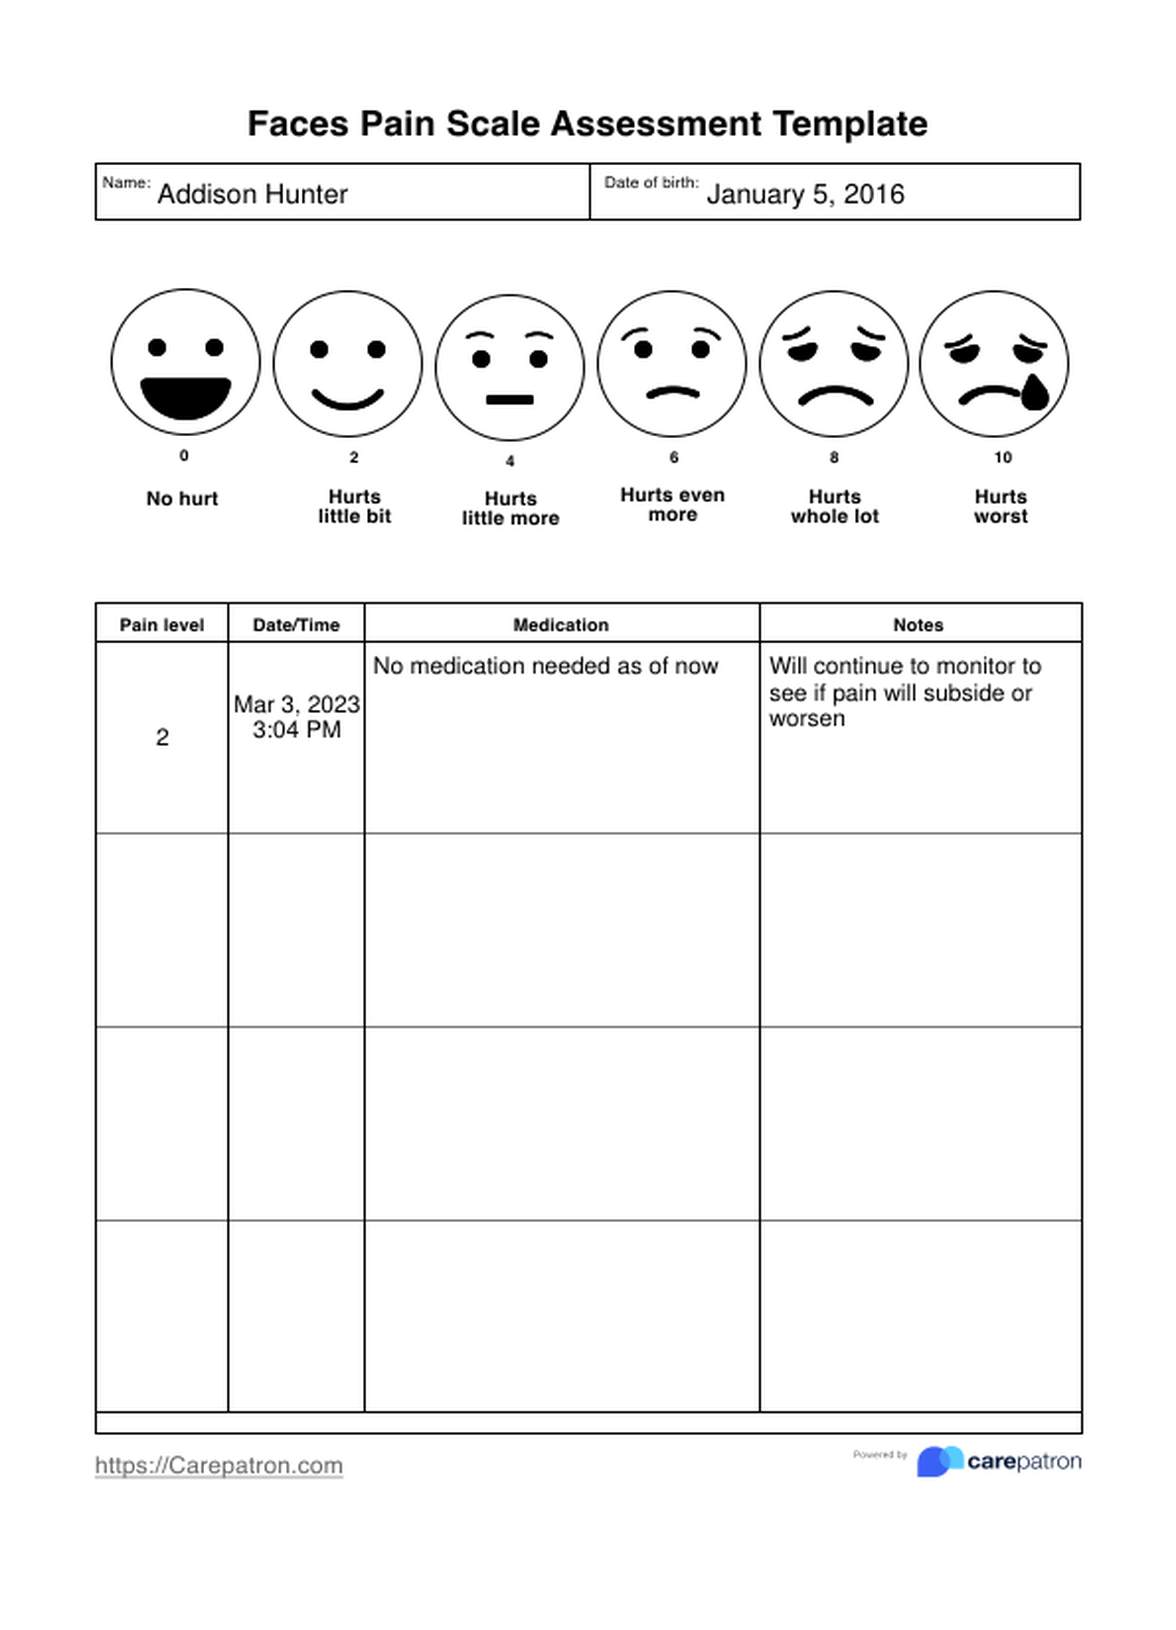 Faces Pain Scale PDF Example